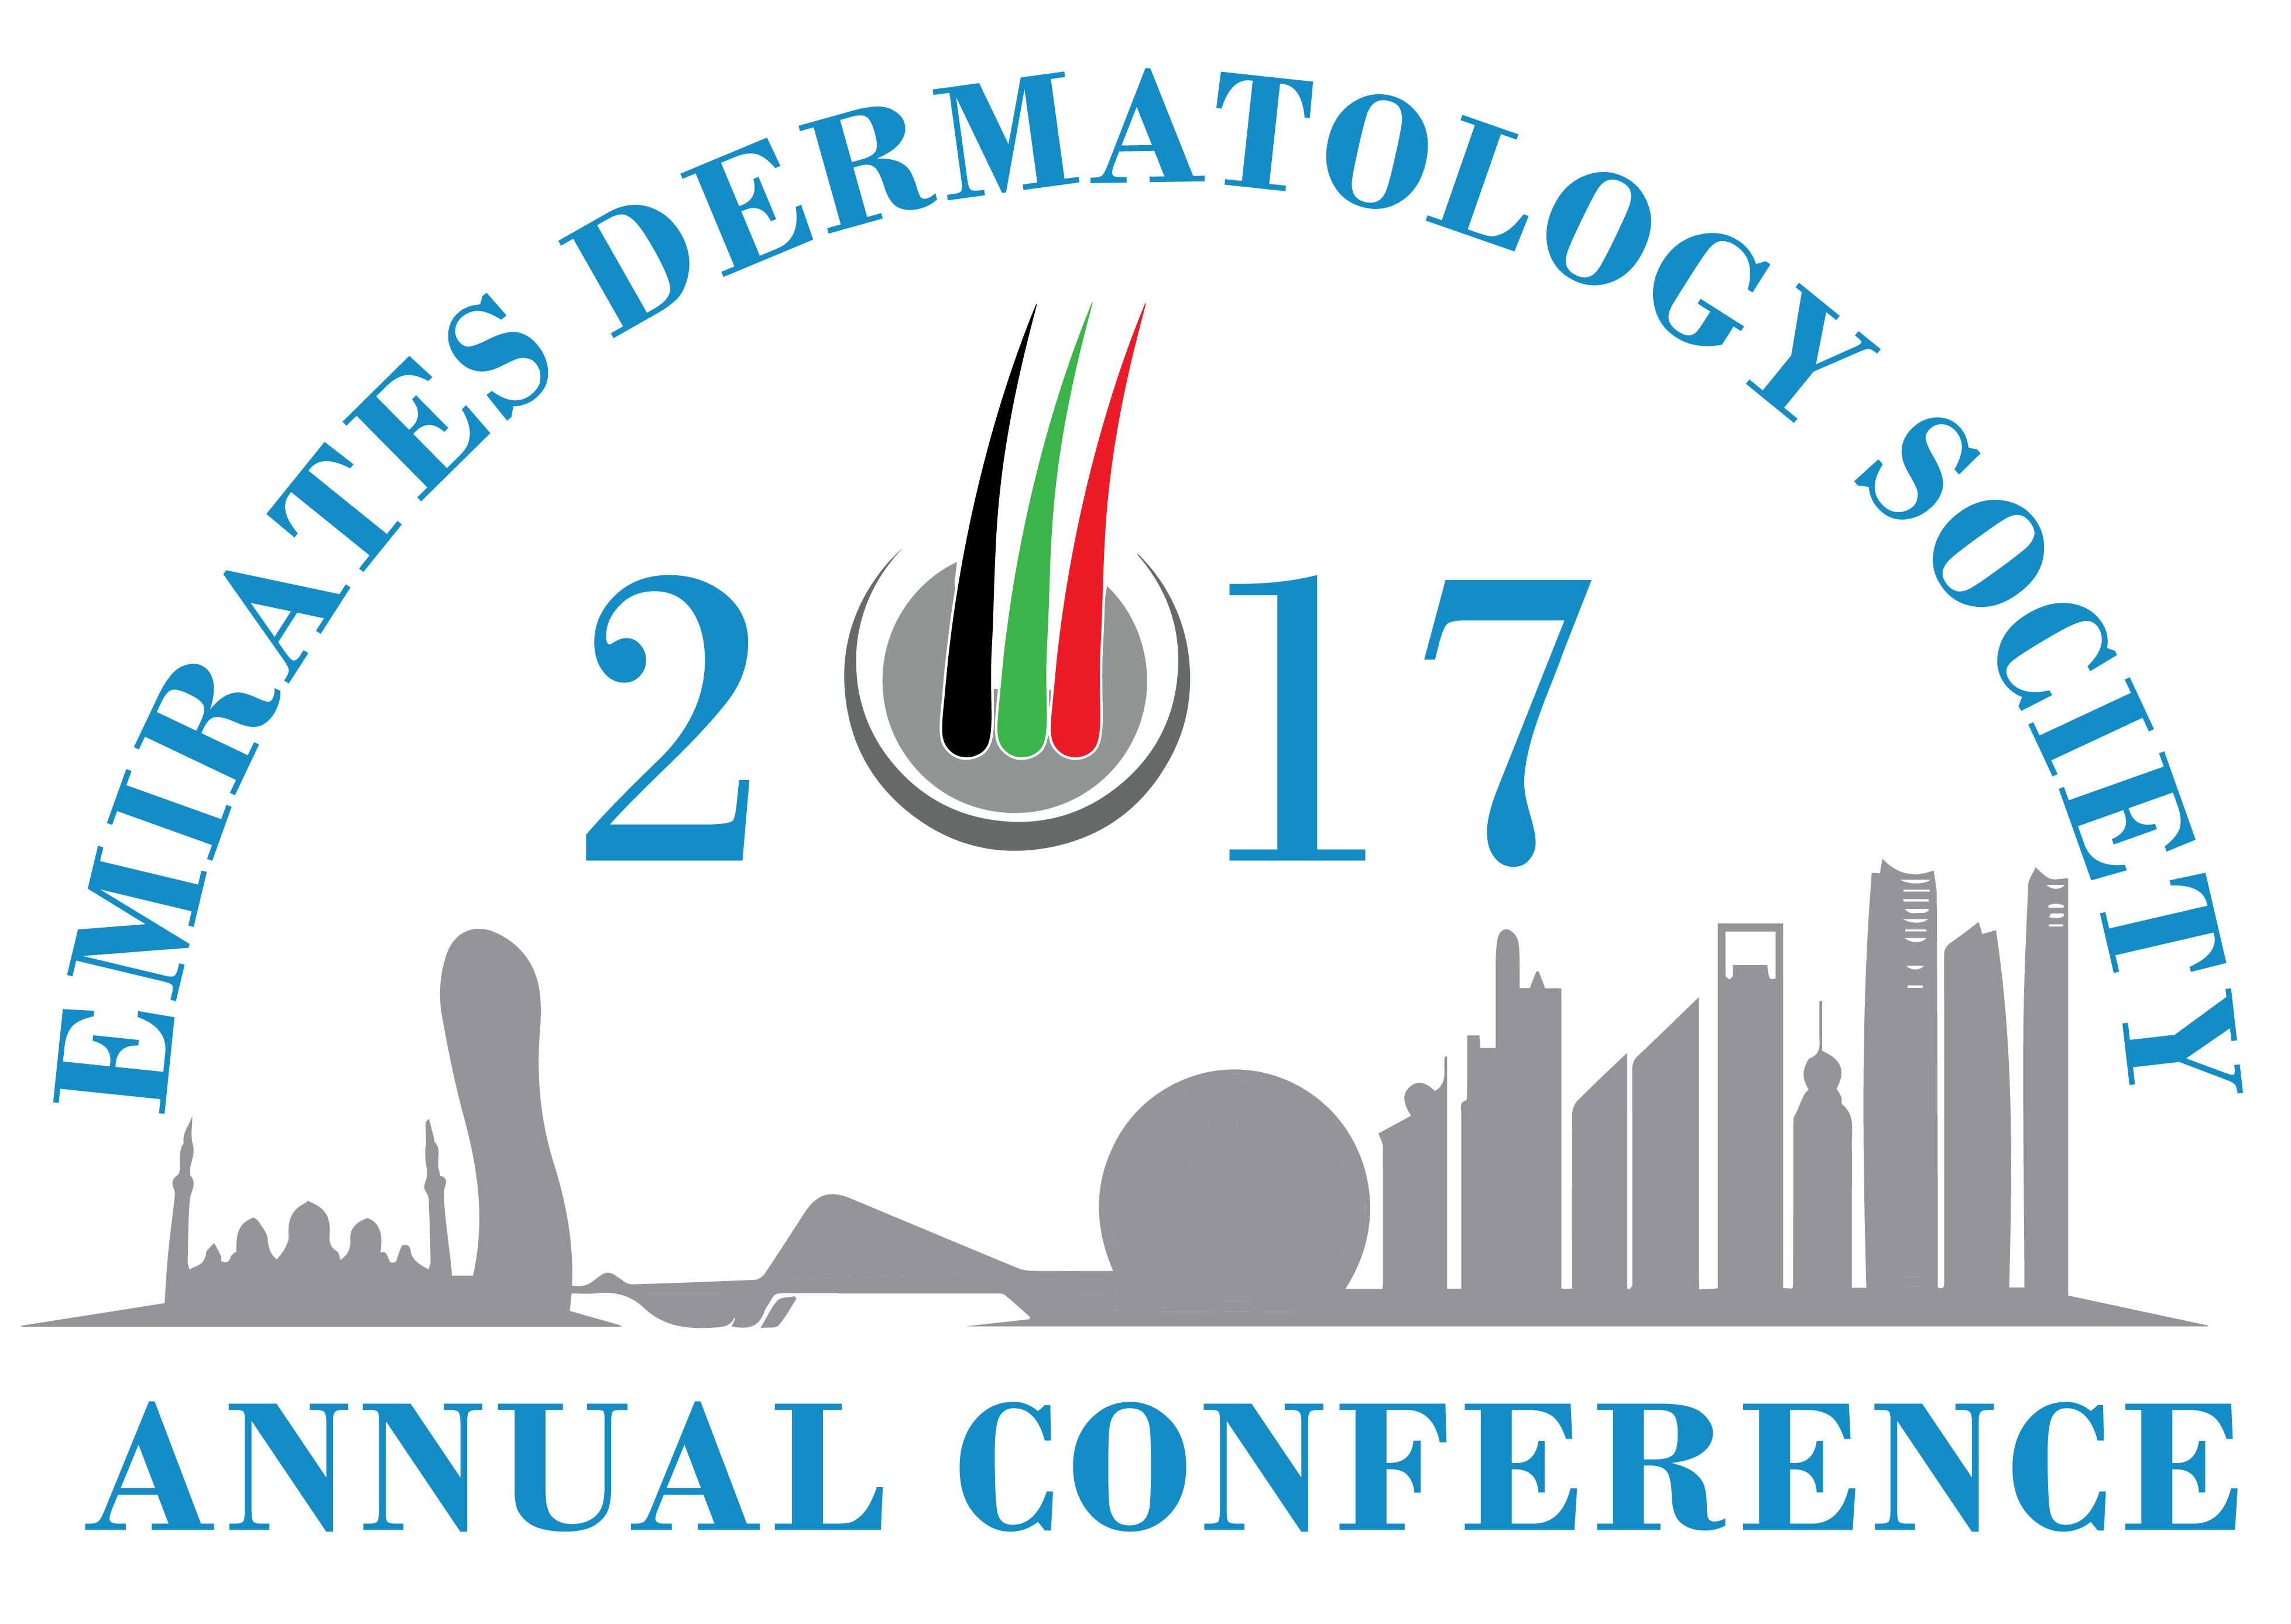 The aim of Emirates Dermatology Society Conference 2017 is to provide a forum of the highest standard for scientific (clinical & experimental), educational and social exchange between professionals involved in Dermatology care (adult & paediatrics) in order to achieve progress in the clinical care of patients. It also aims to build bridges between dermatologists practicing all over the world to easily exchange knowledge and experience.